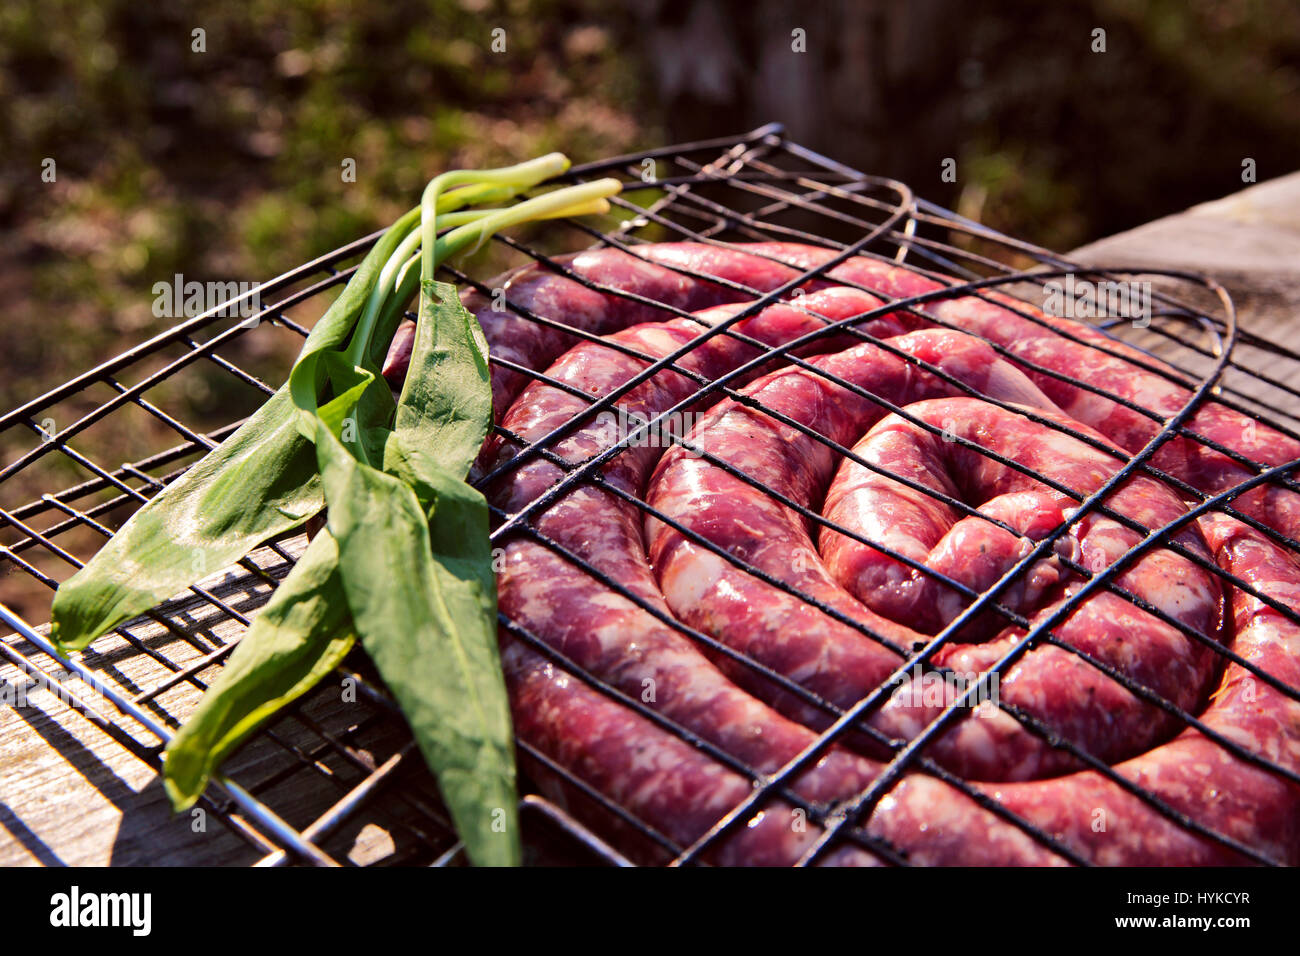 Uncooked sausages for barbecue. Travel kielbasa cooking. Picnic outdoors Stock Photo